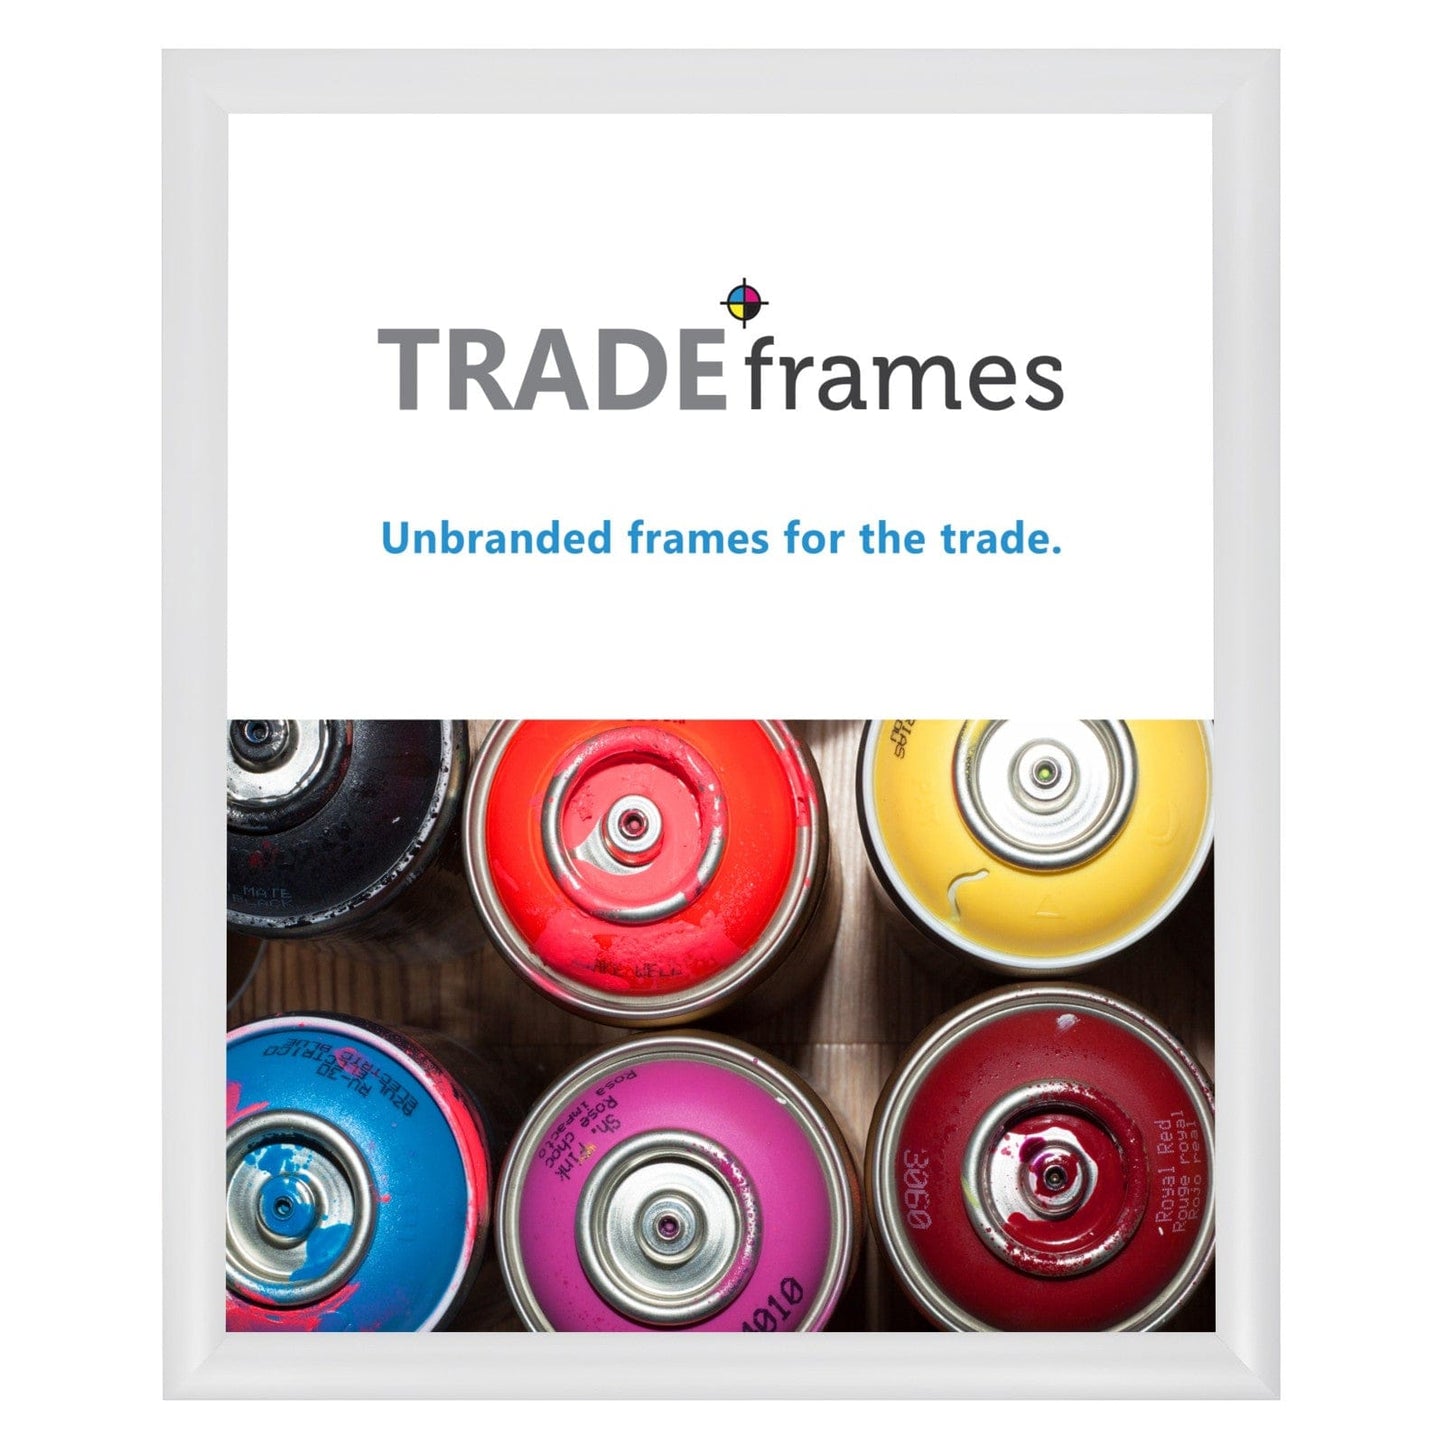 20x24 TRADEframe White Snap Frame 20x24 - 1.2 inch profile - Snap Frames Direct